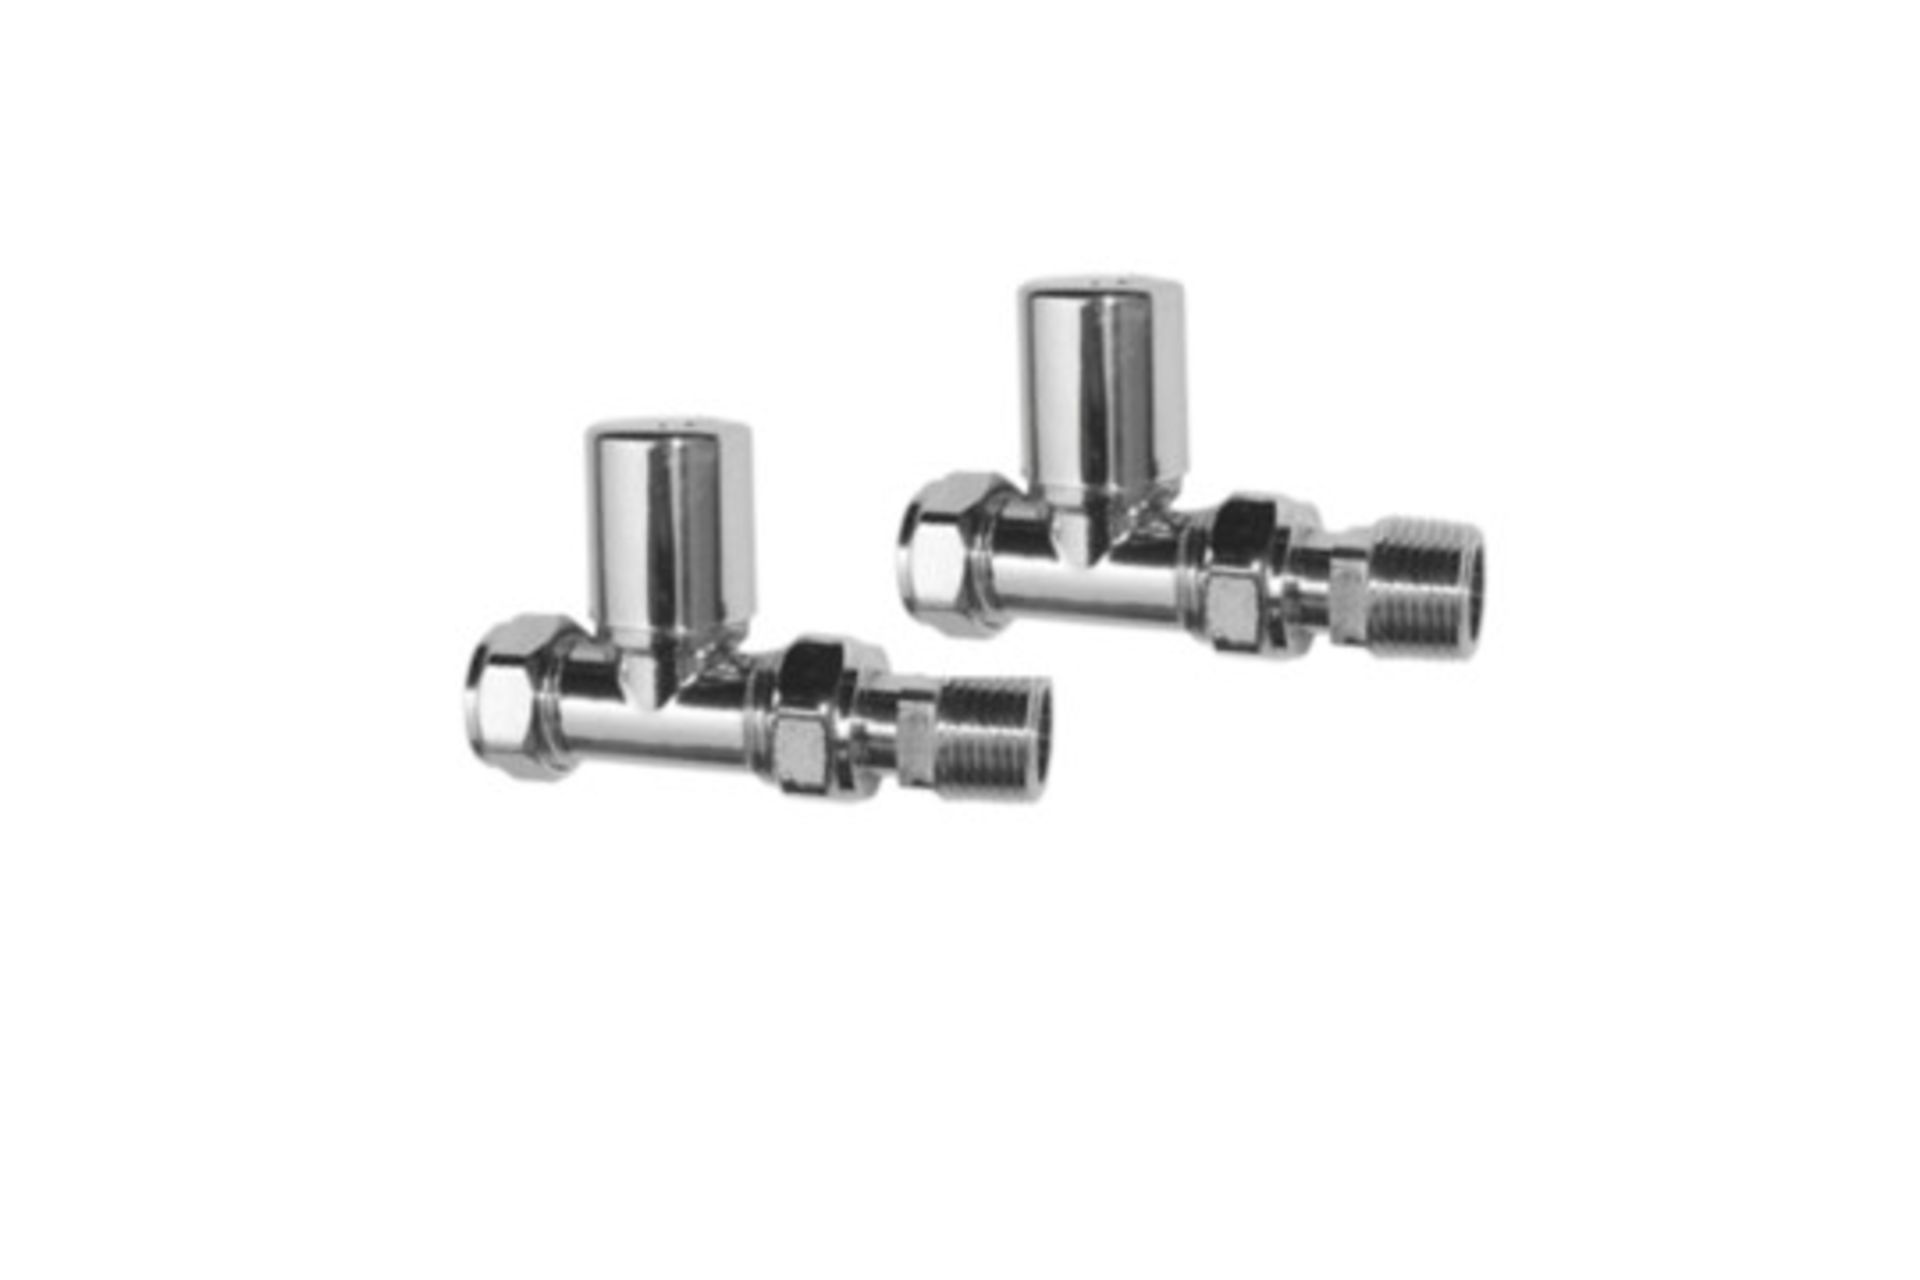 (SU1008) 15mm Standard Connection Straight Radiator Valves - Heavy Duty Polished Chrome Plated ... - Image 2 of 2